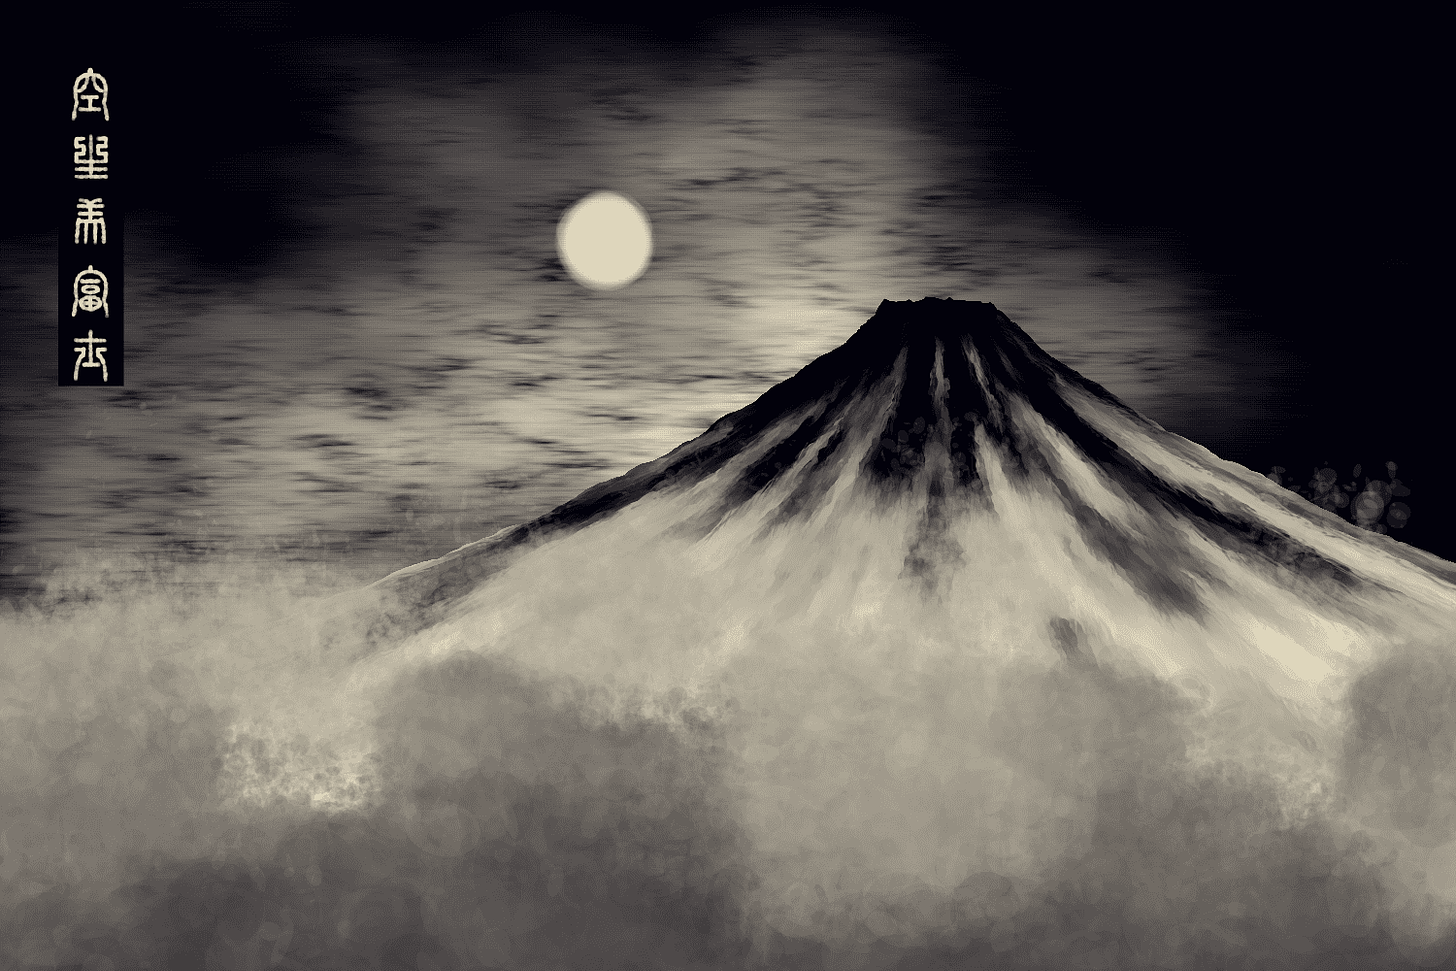 Fuji - inspired by Mt. Fuji, the highest and most famous sacred mountain in Japan.